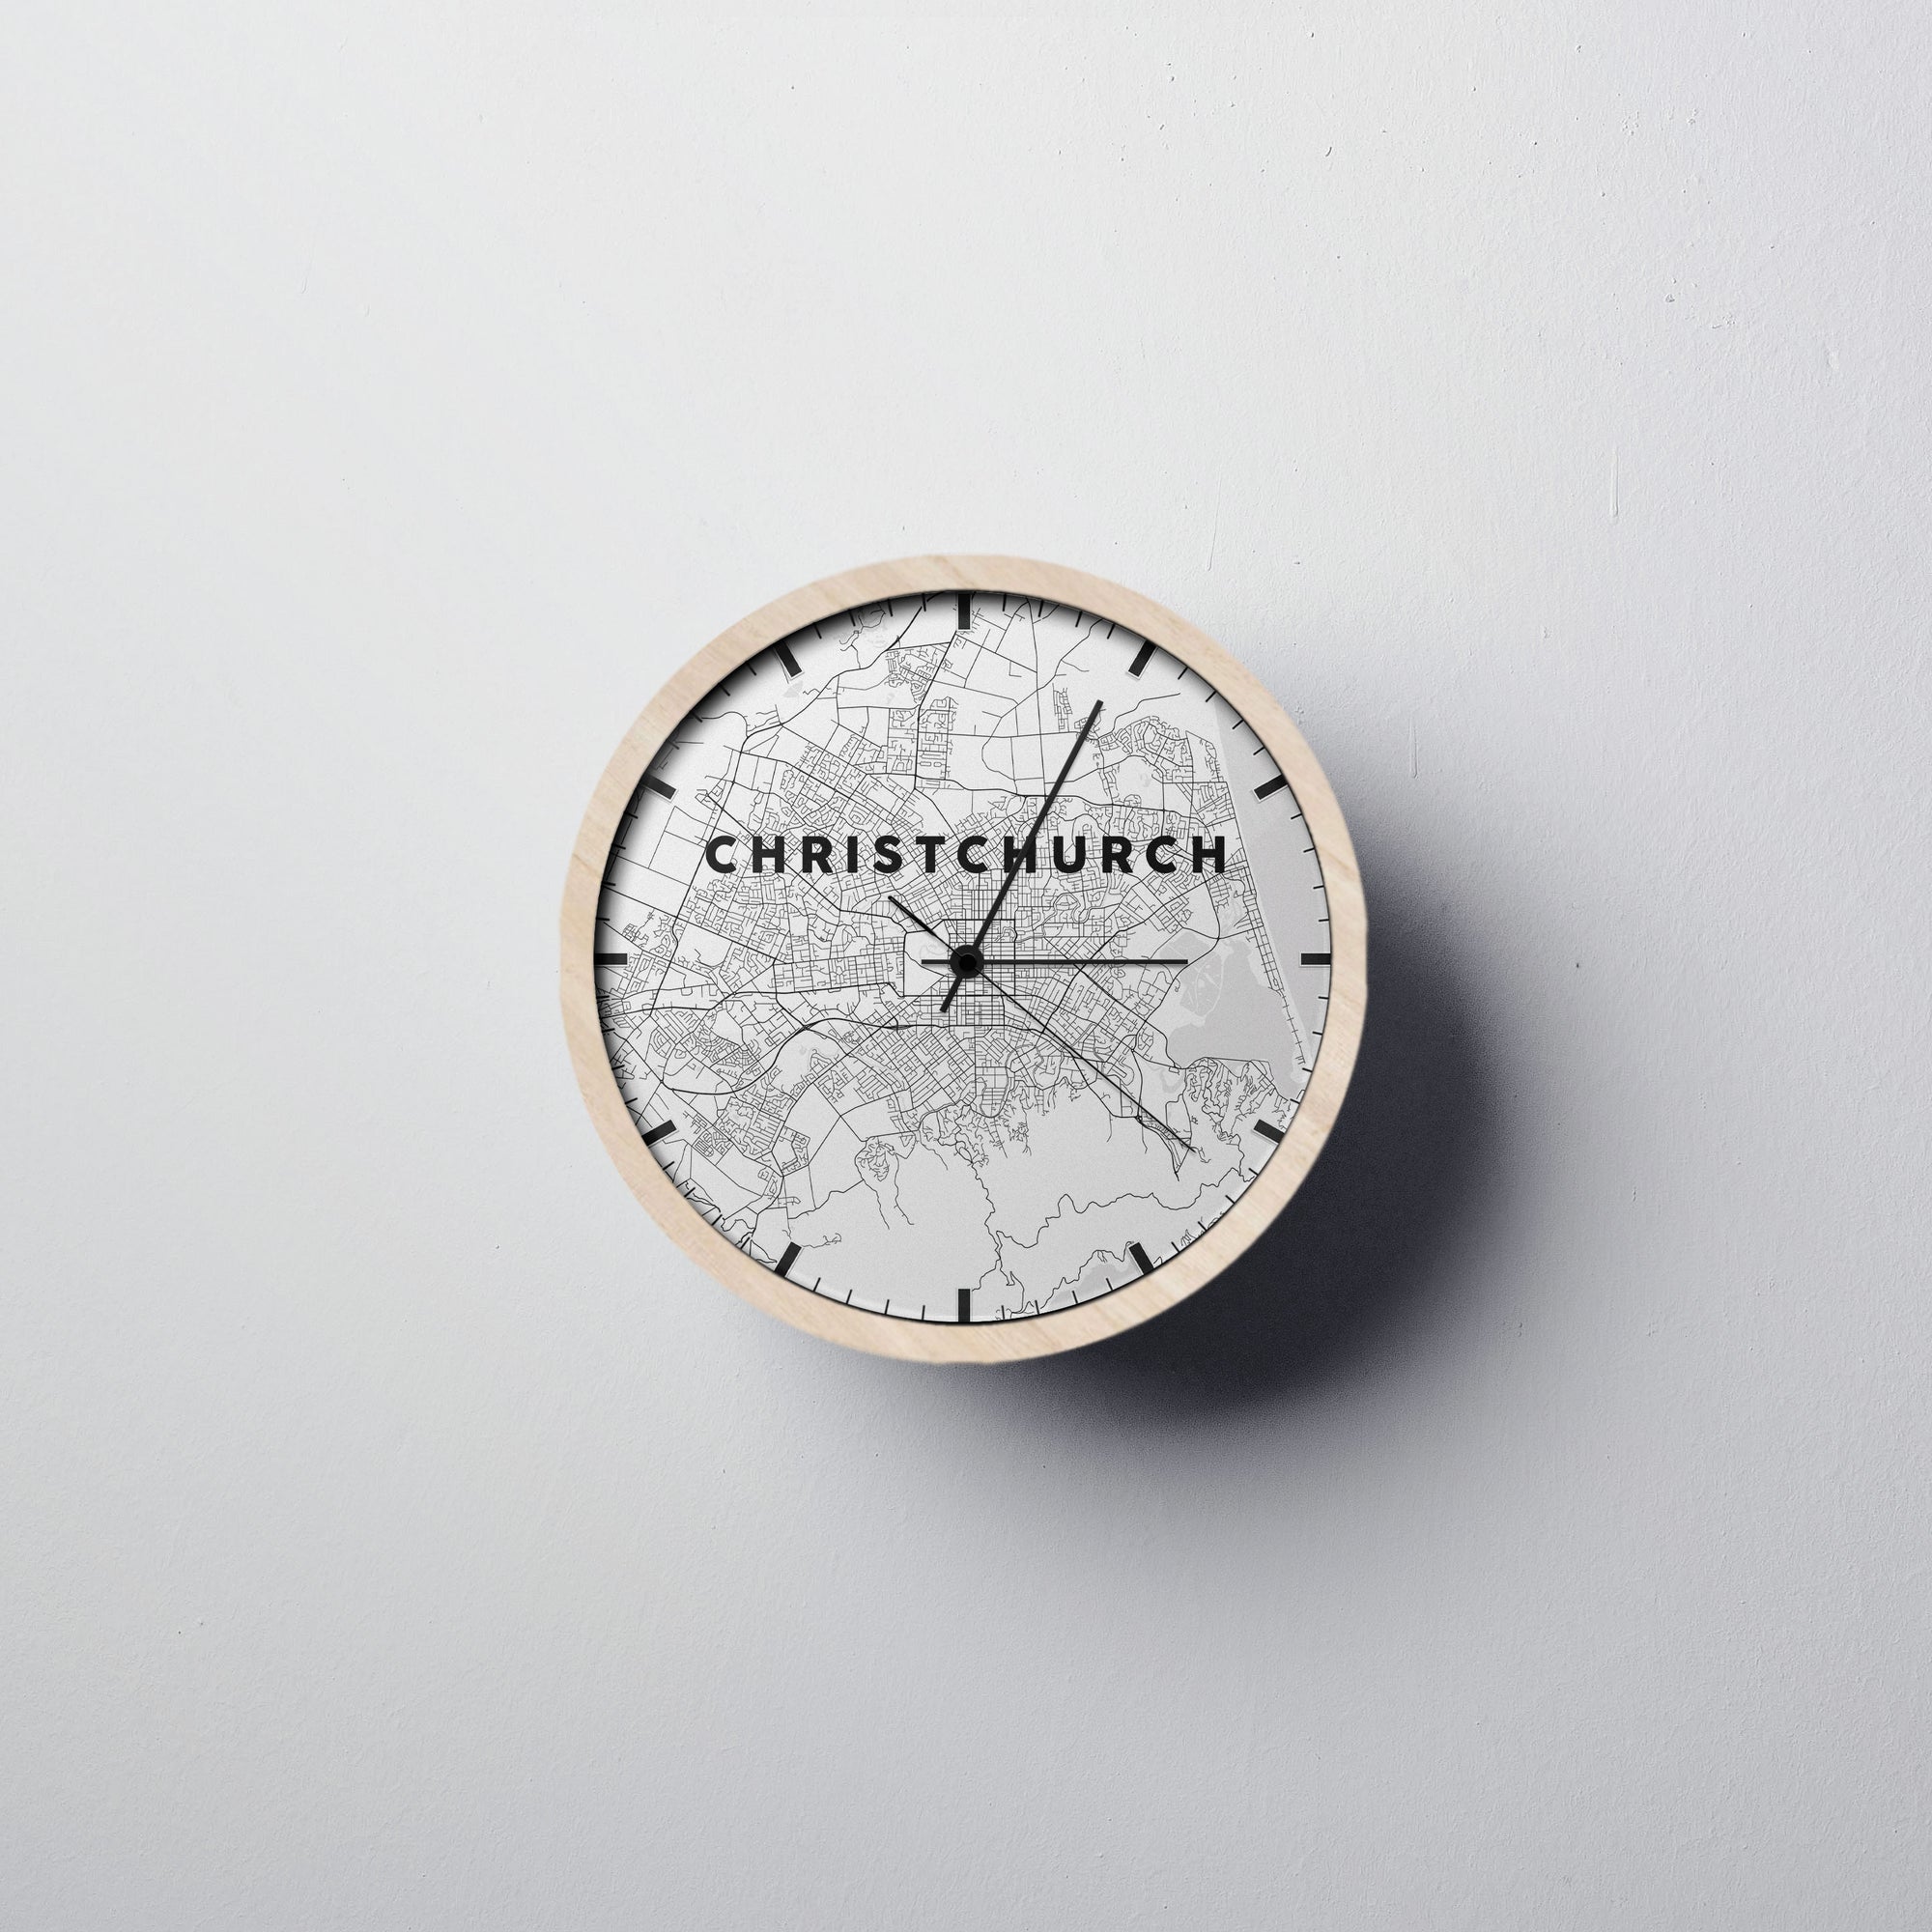 Christchurch Wall Clock - Point Two Design